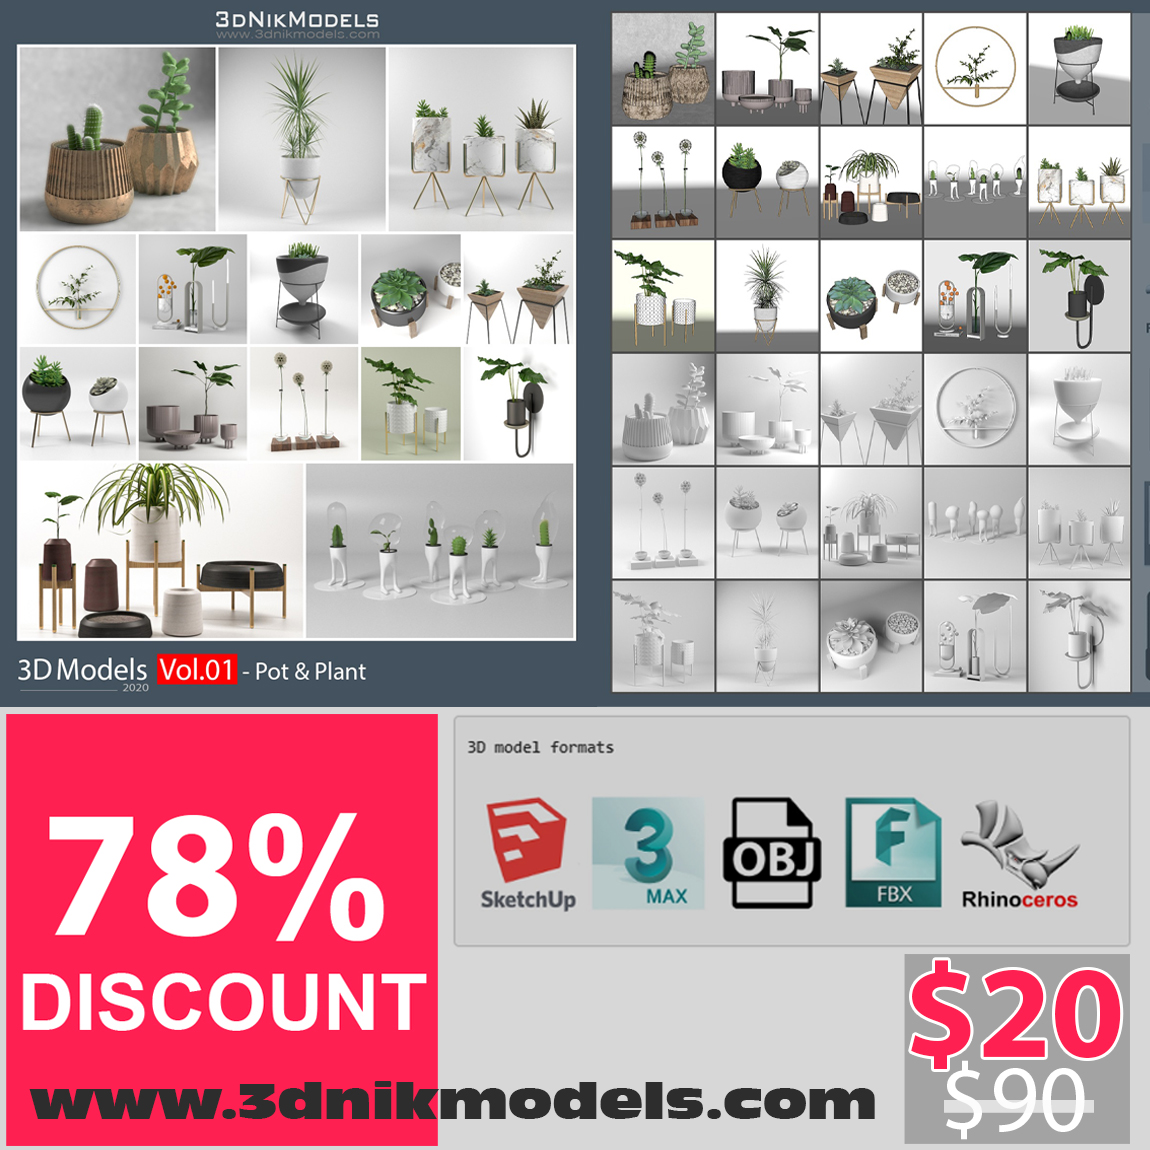 😍Pot and plant collection😍 3dnikmodels.com #Sketchup file / #VRay Ready / with #3dsmax , Rhino(#3dm) , #fbx , #obj , #dae , #stl formats #3dnikmodels #3dmodel #rendering #3dmodeling #interiordesign #sketchup #vray #render #modeling #architecture #interior